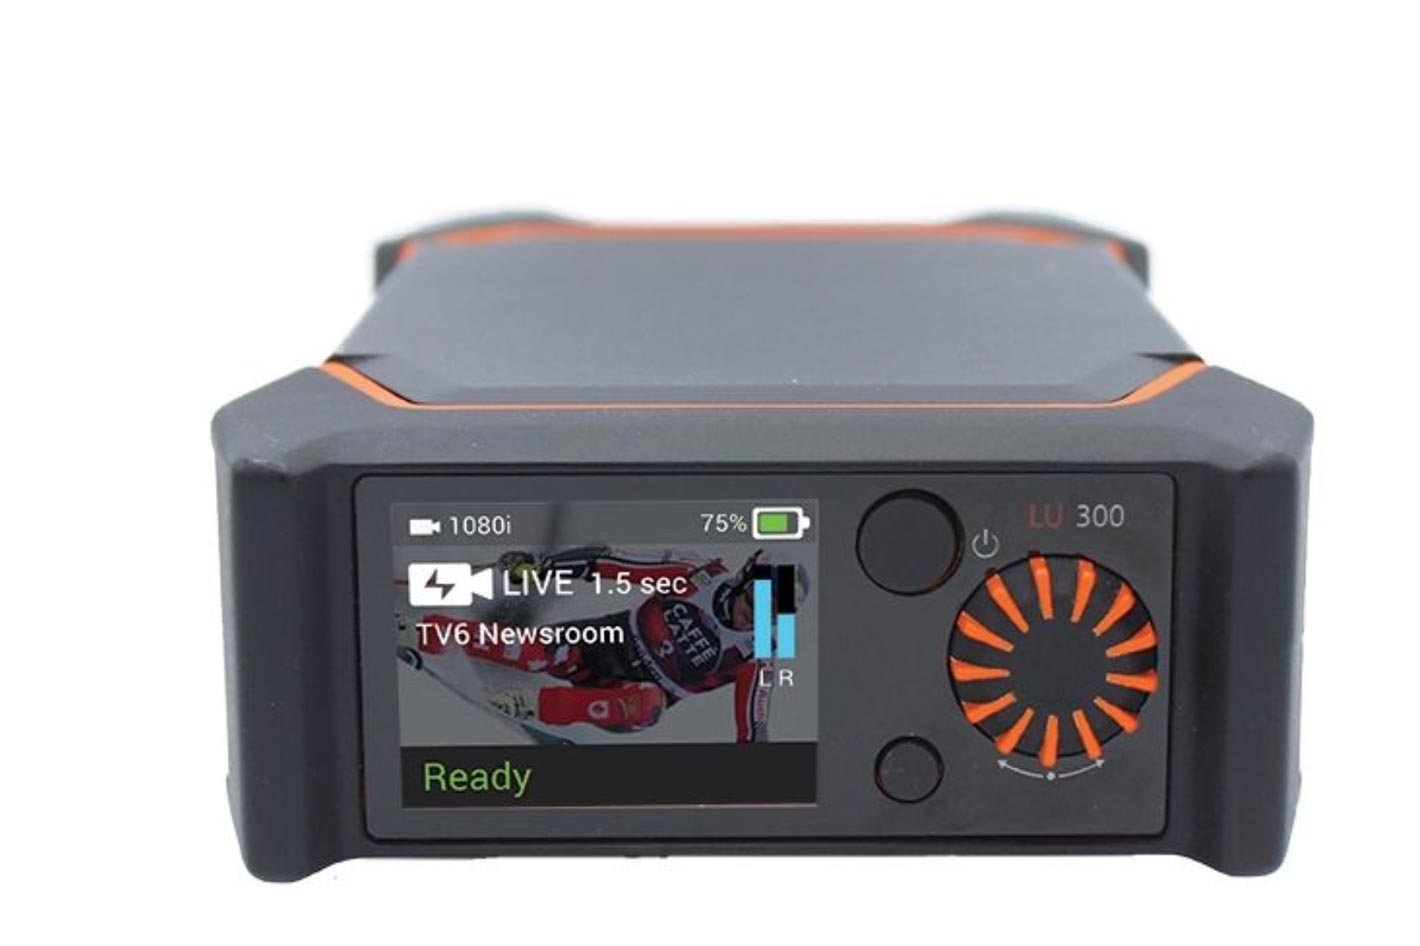 LiveU: an end-to-end solution for remote live productions